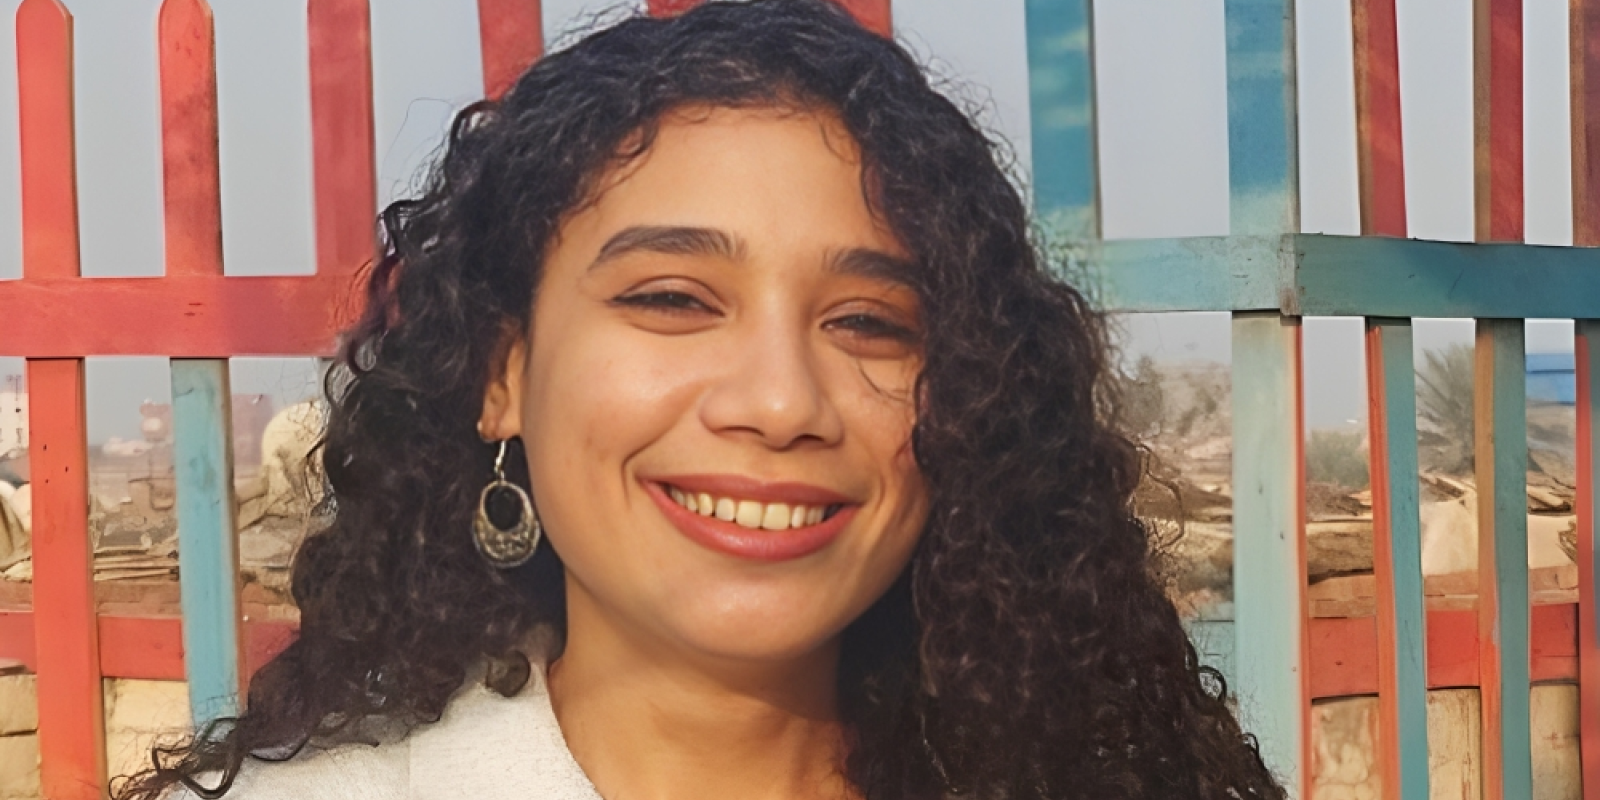 Headshot of a girl with curly hair smiling